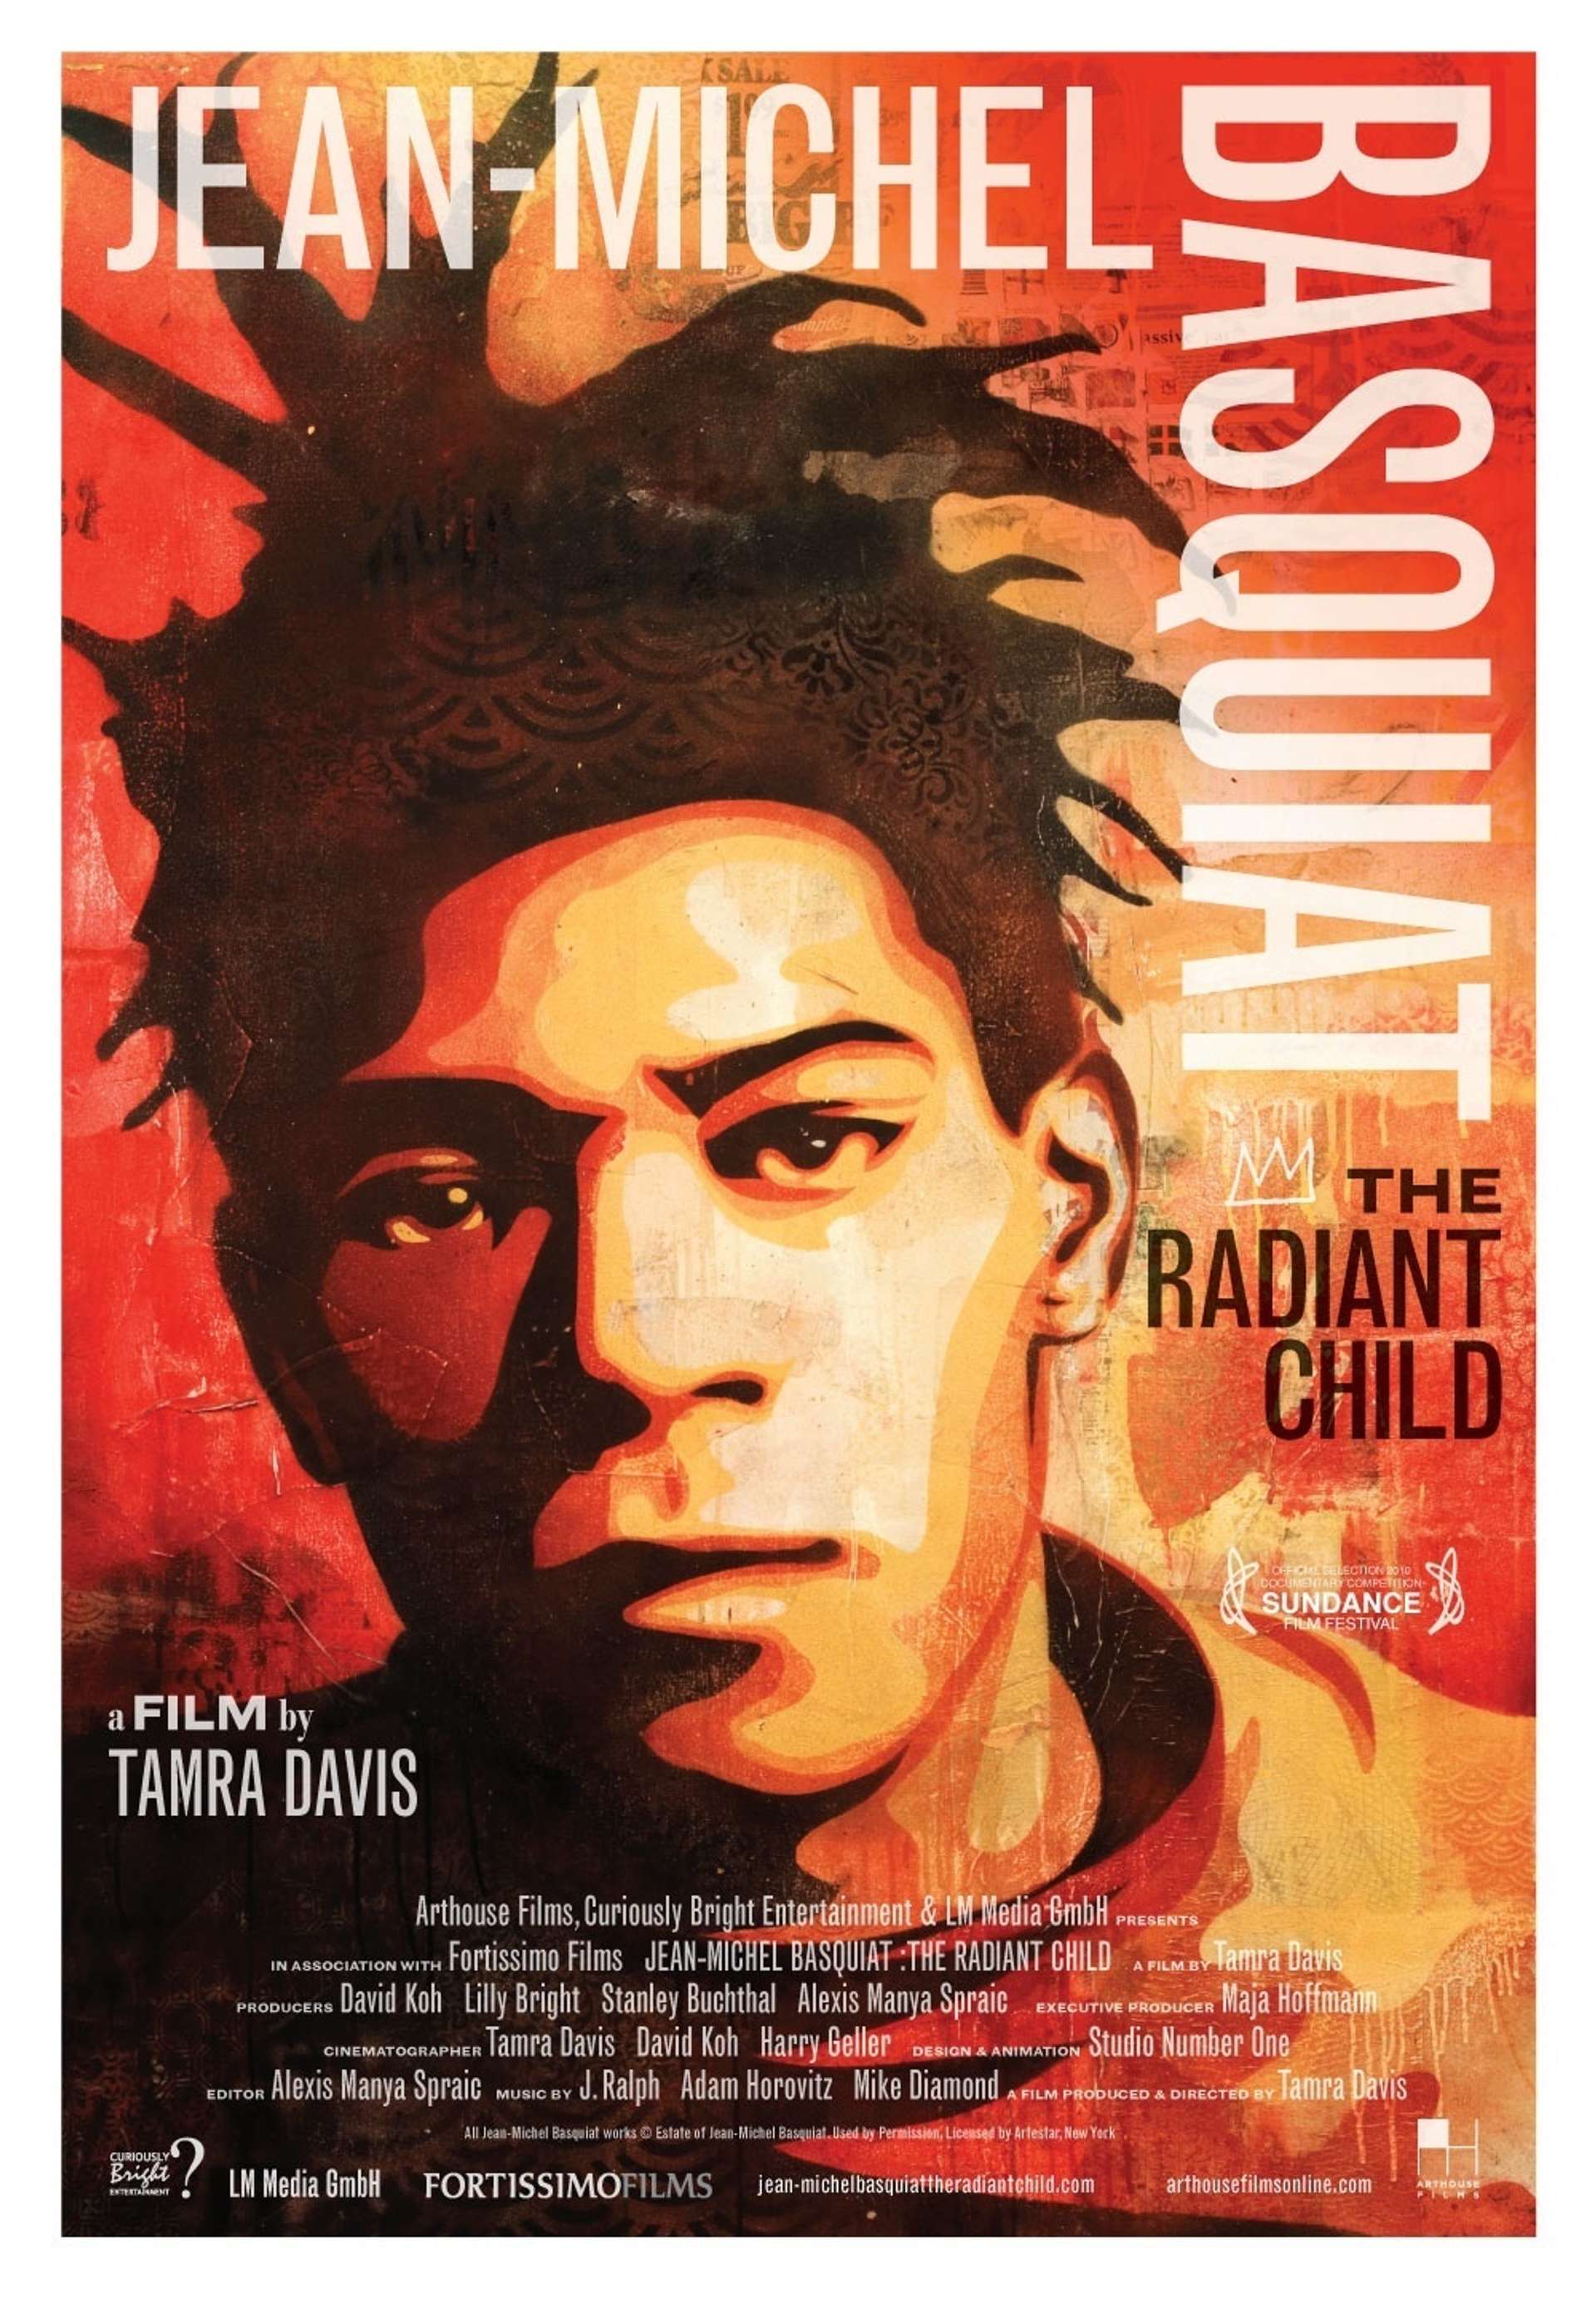 An image of the film poster of Basquiat’s documentary “The Radiant Child”. It shows a stylised portrait of the artist, in warm colours.